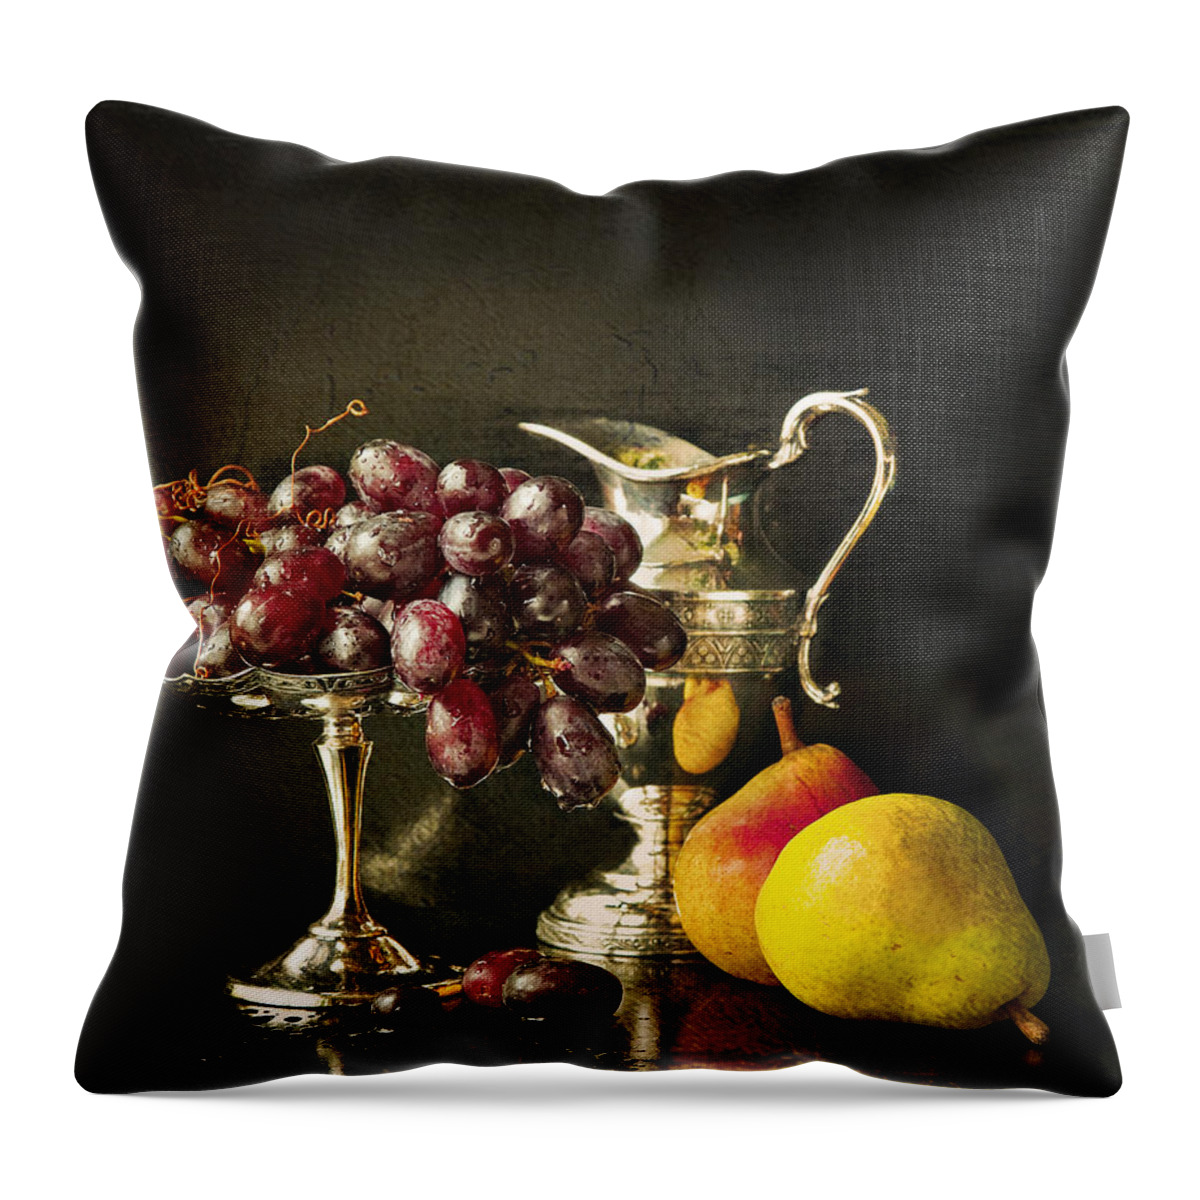 Chiaroscuro Throw Pillow featuring the photograph Still Life With Fruit by Theresa Tahara